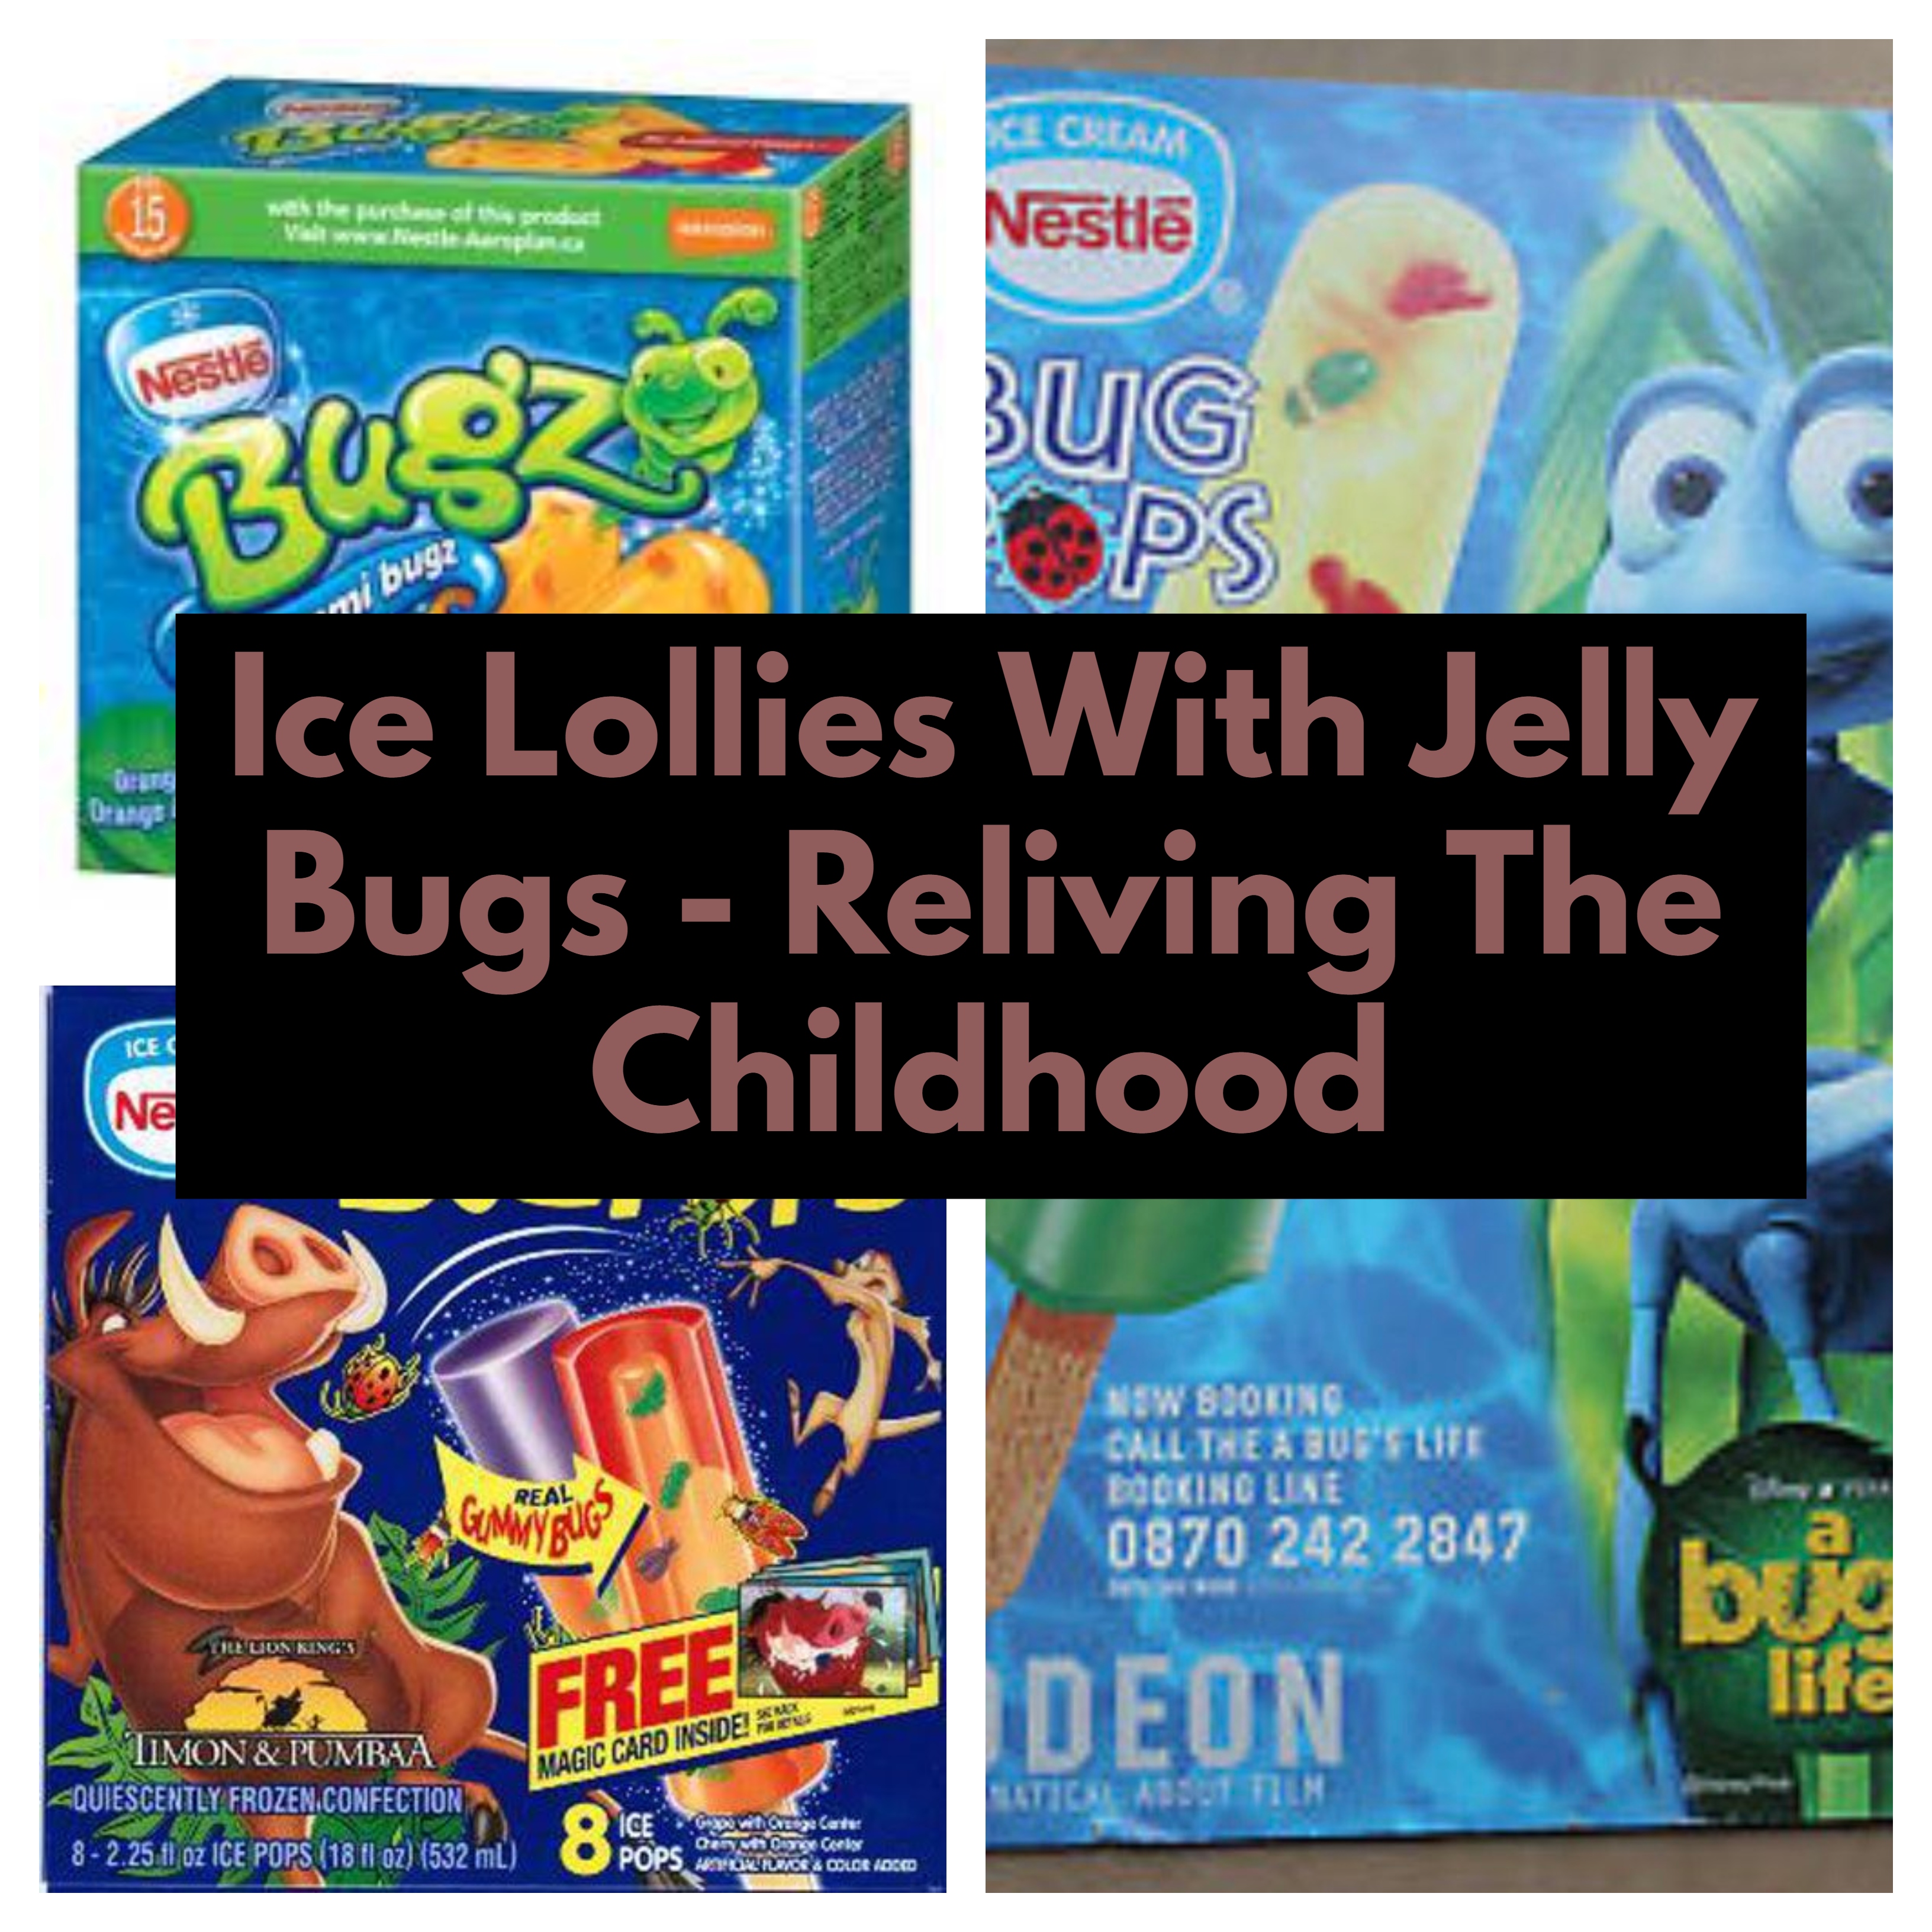 Ice Lollies With Jelly Bugs - Reliving The Childhood